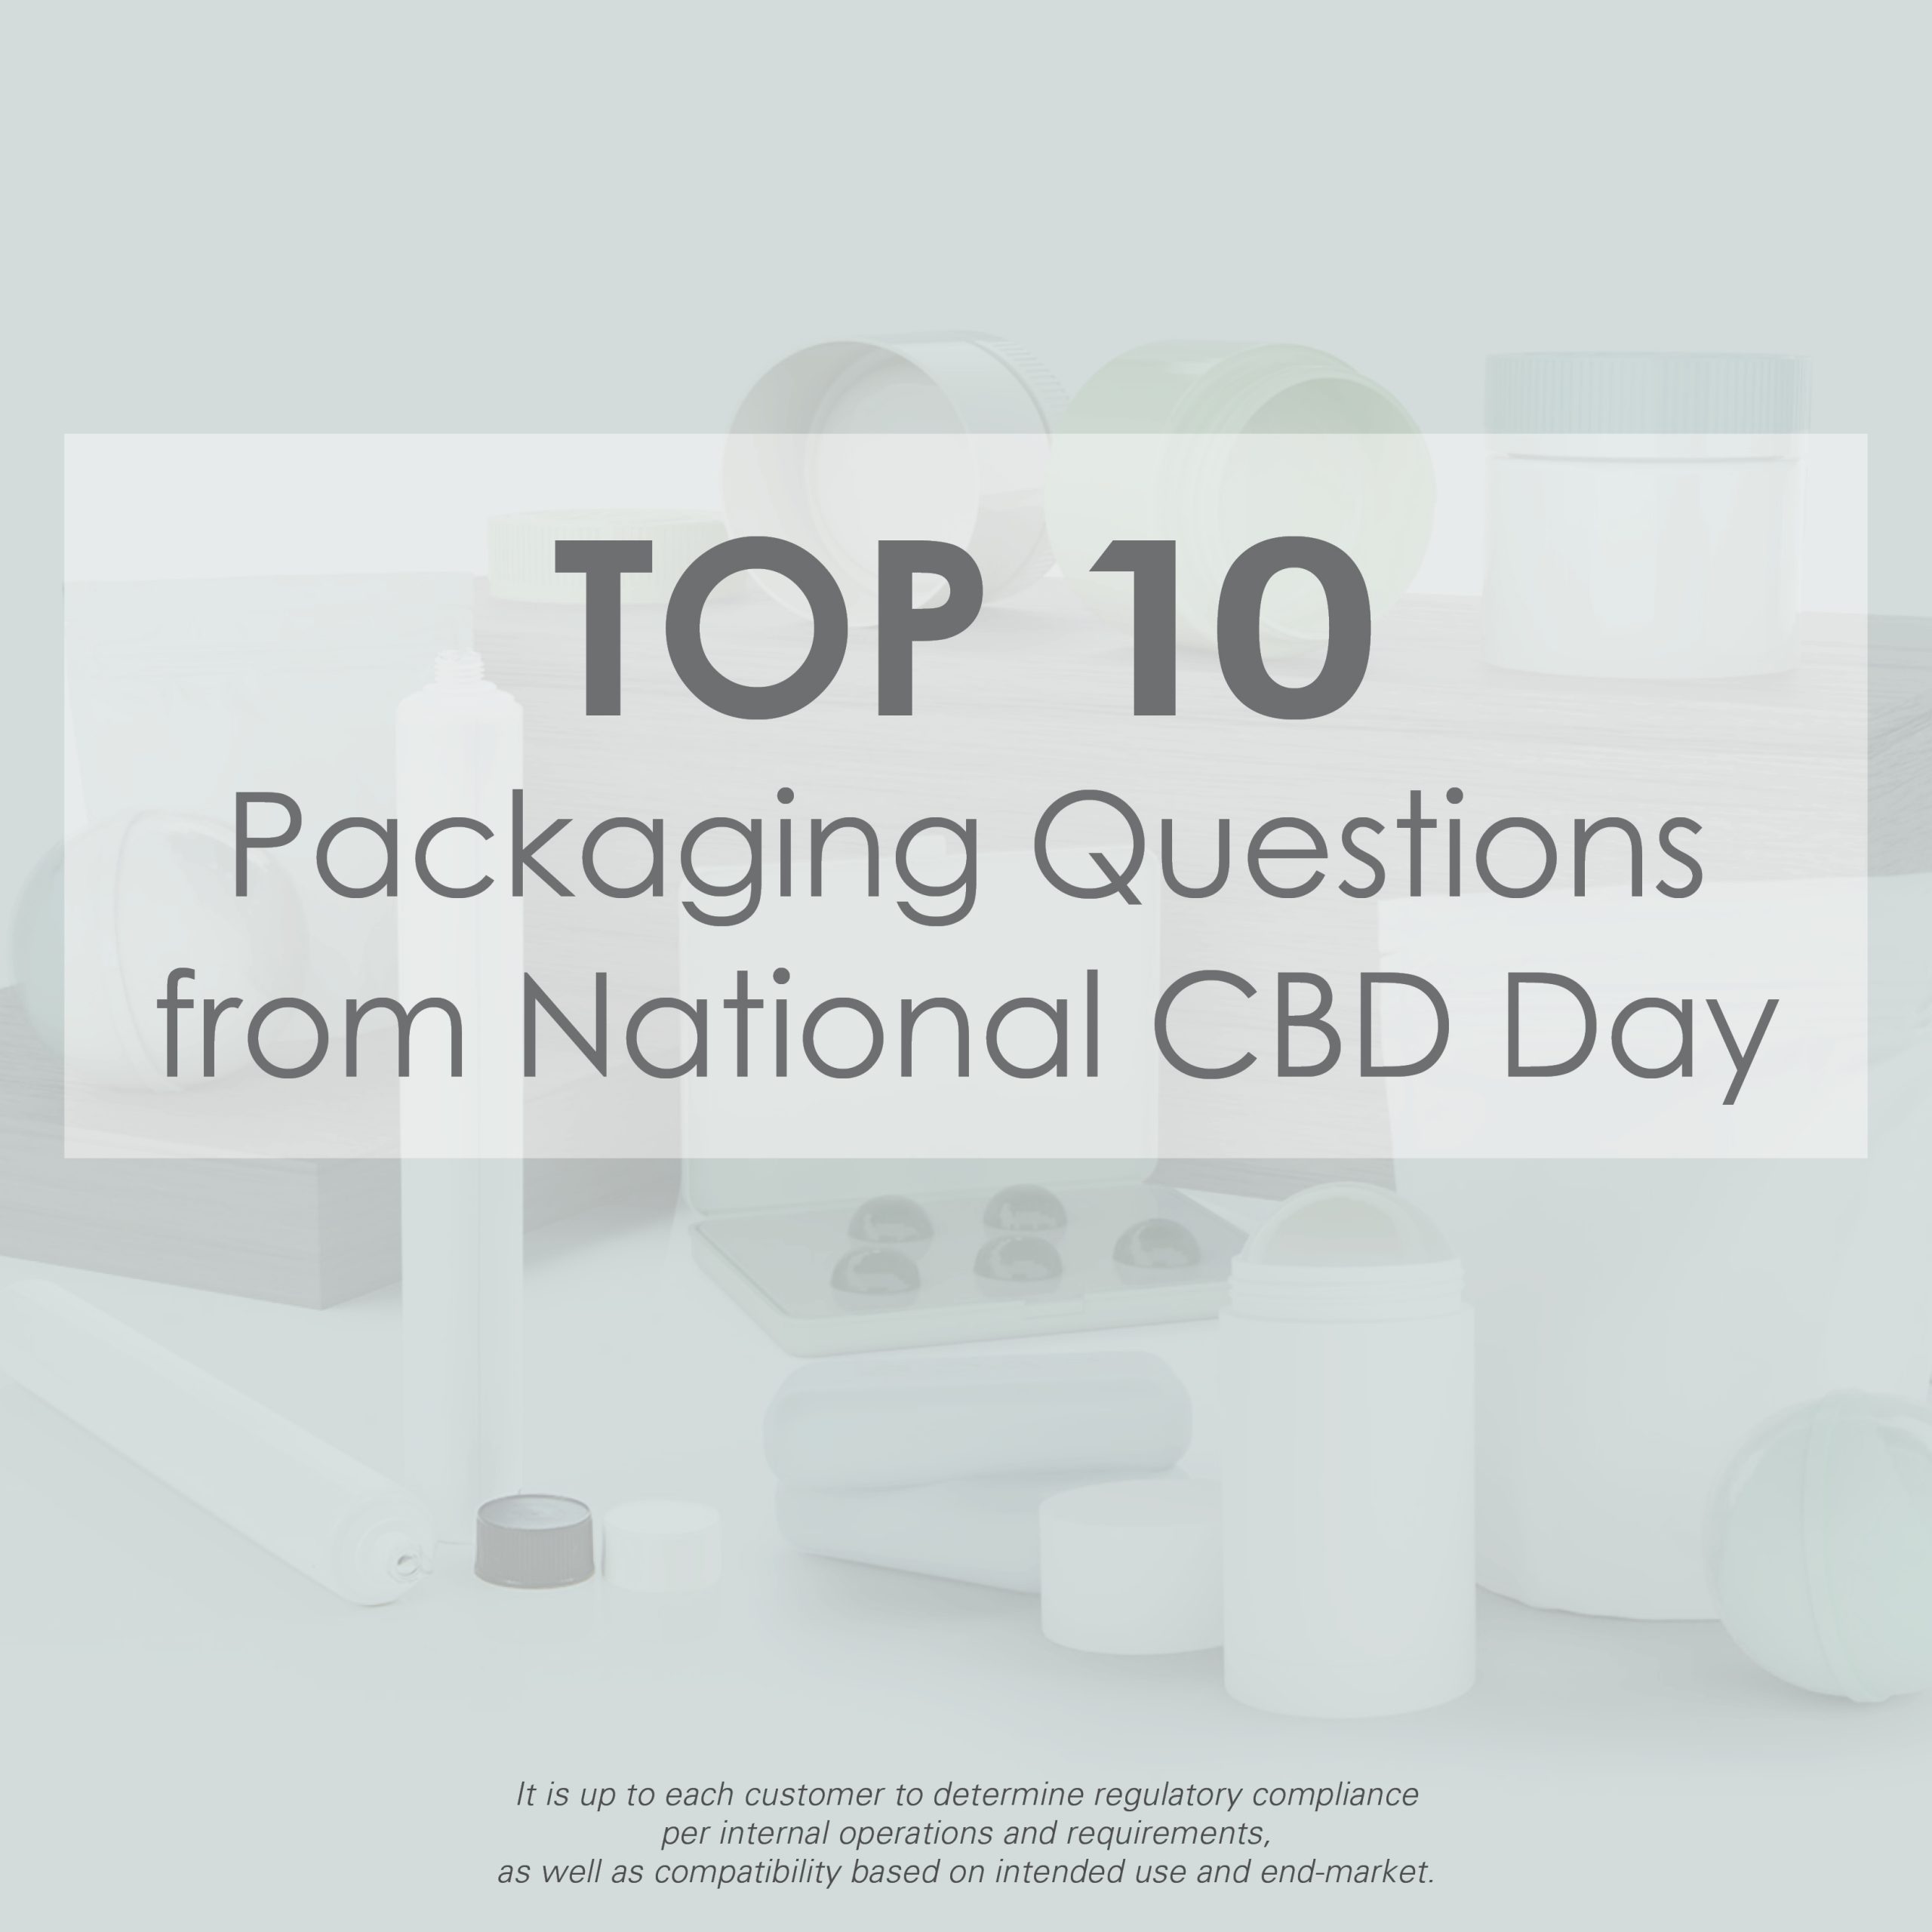 Top 10 Packaging Questions from National CBD Day